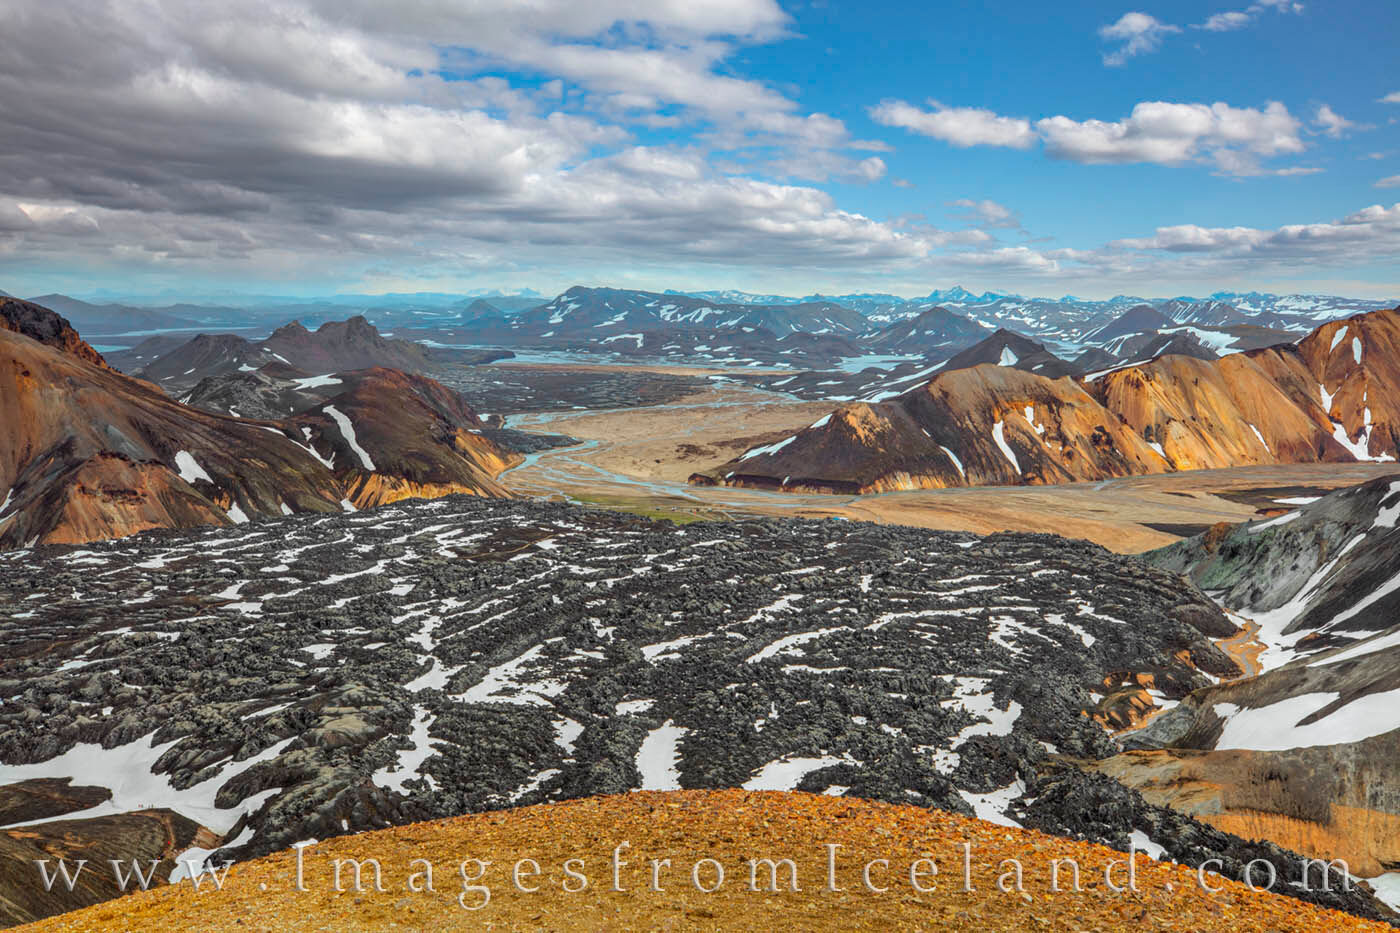 Landmannalaugar (the highlands) is one of the most amazing places in Iceland.